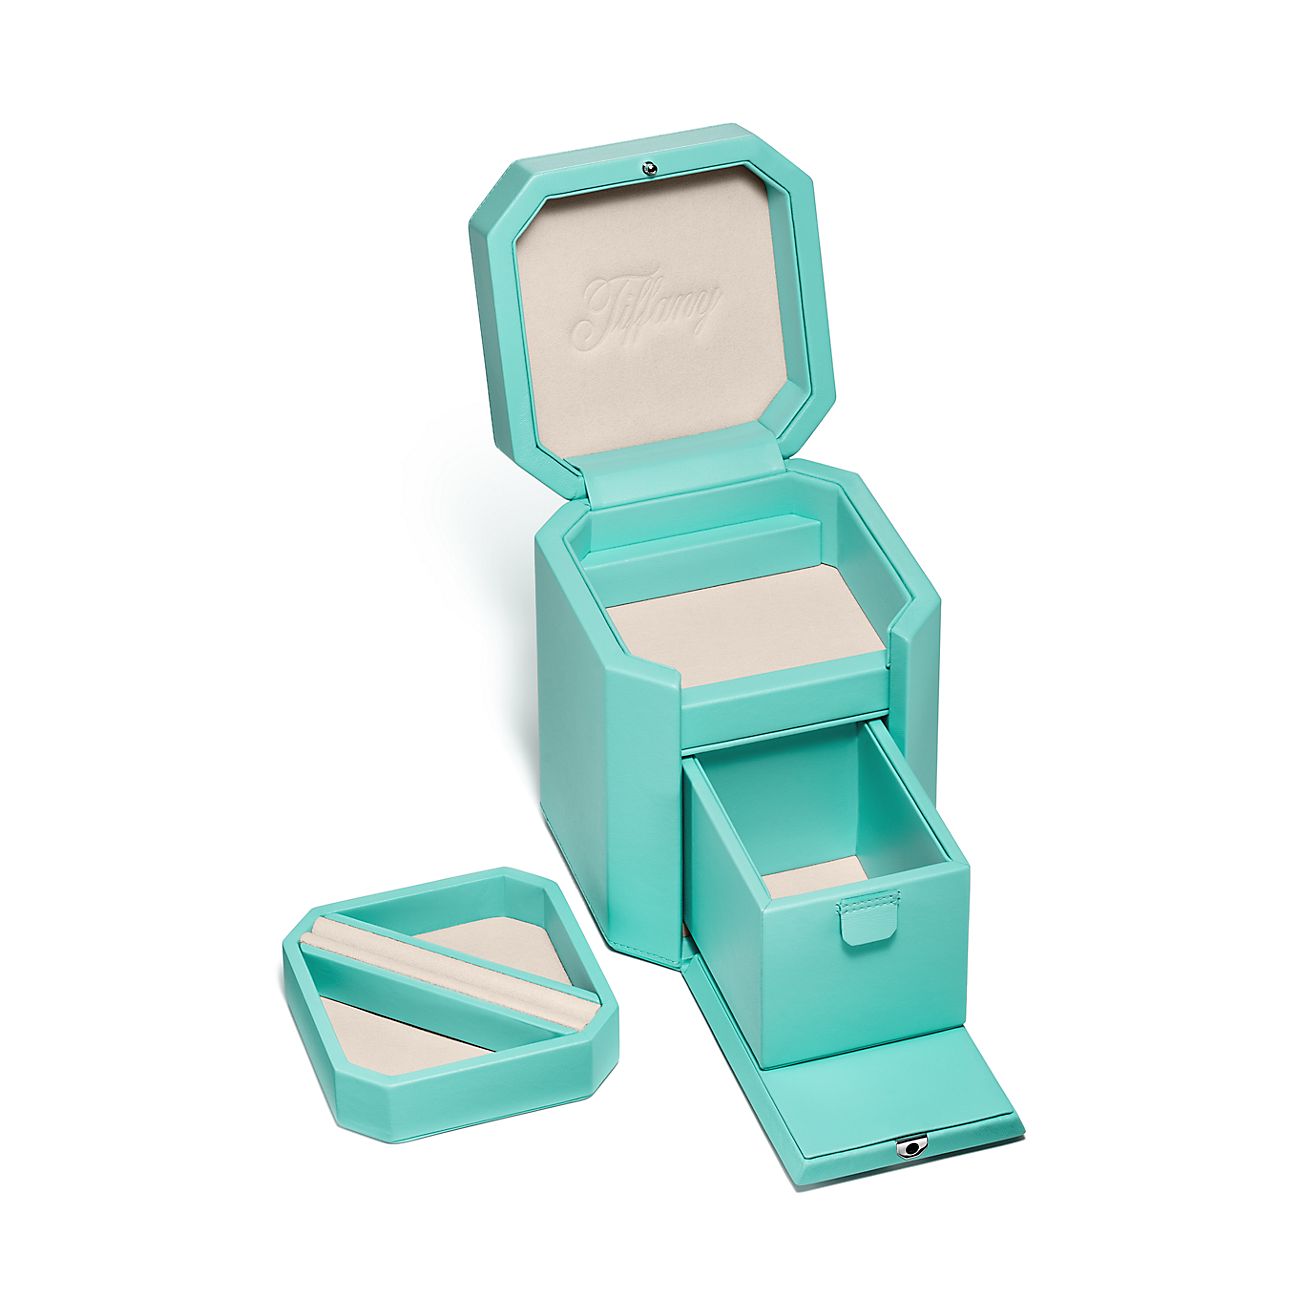 Tiffany Facets Small Jewelry Box in Tiffany Blue Leather, Size: 3.2 in.